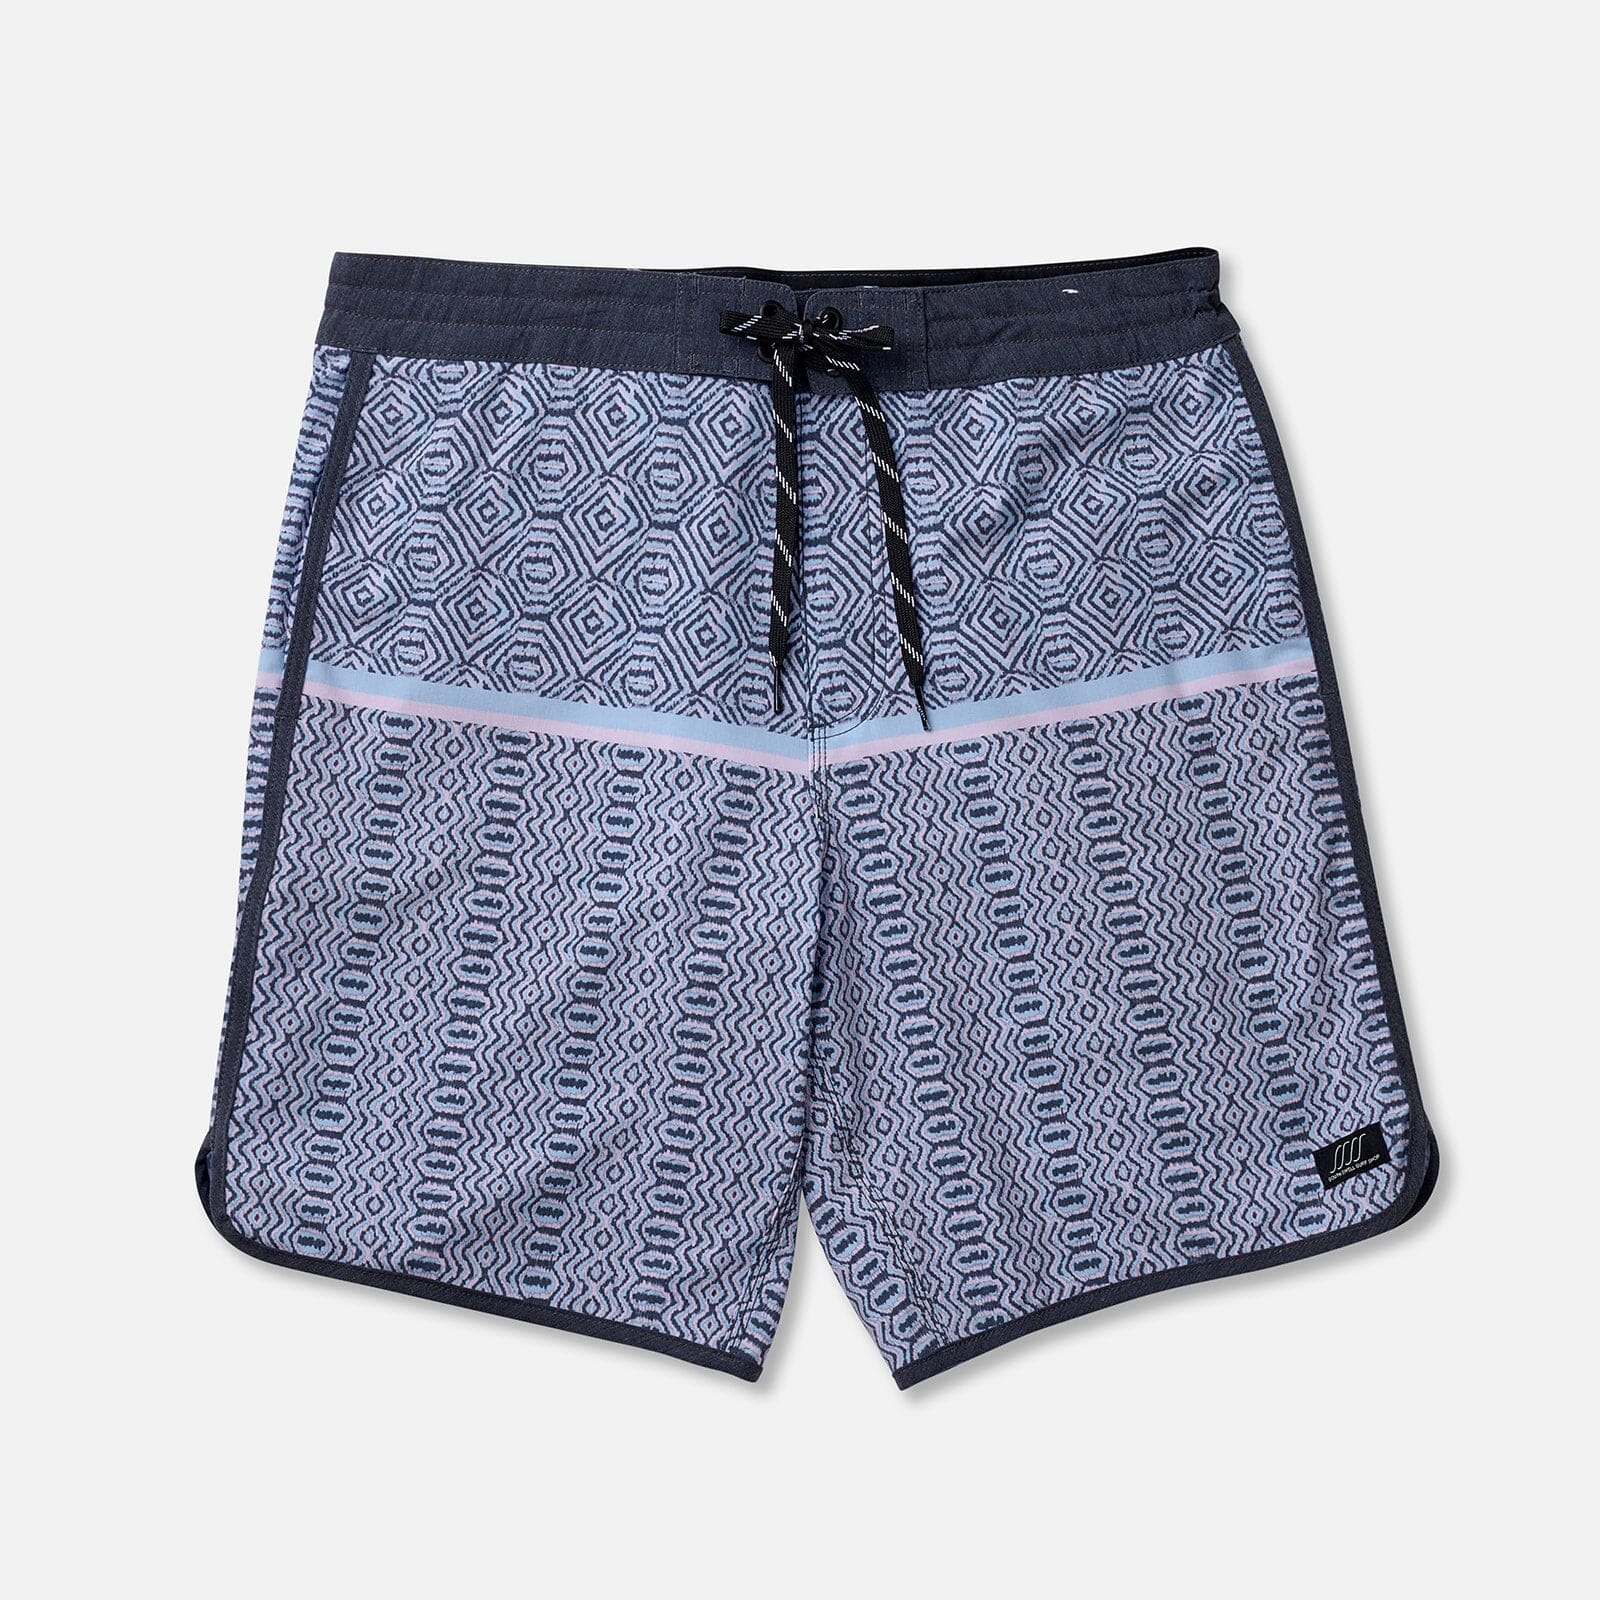 South Swell Mens Mectrics Boardshort